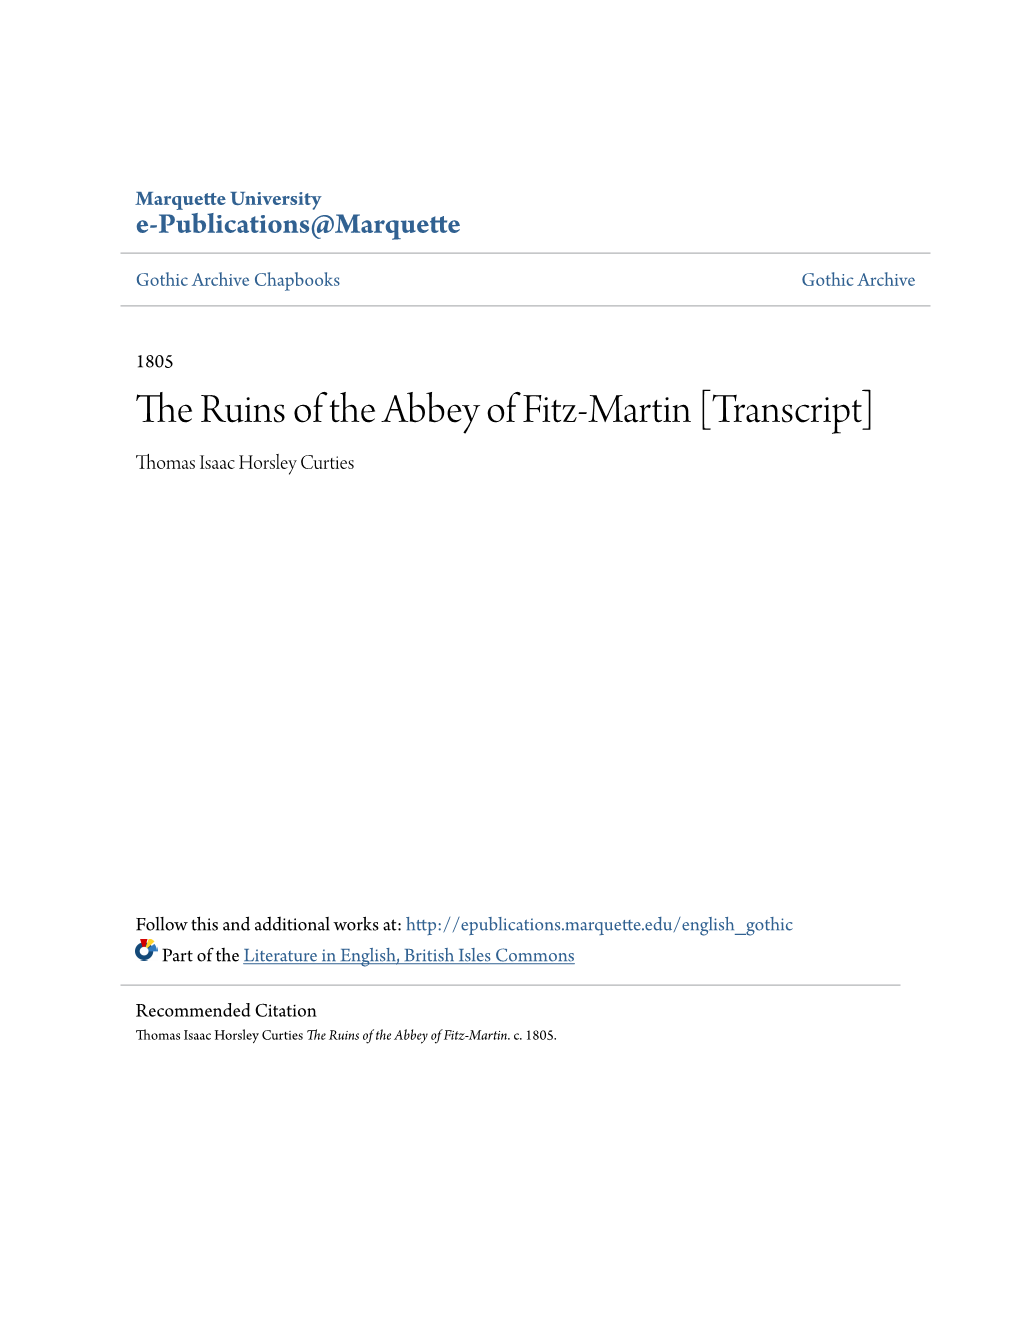 The Ruins of the Abbey of Fitz-Martin [Transcript] Thomas Isaac Horsley Curties